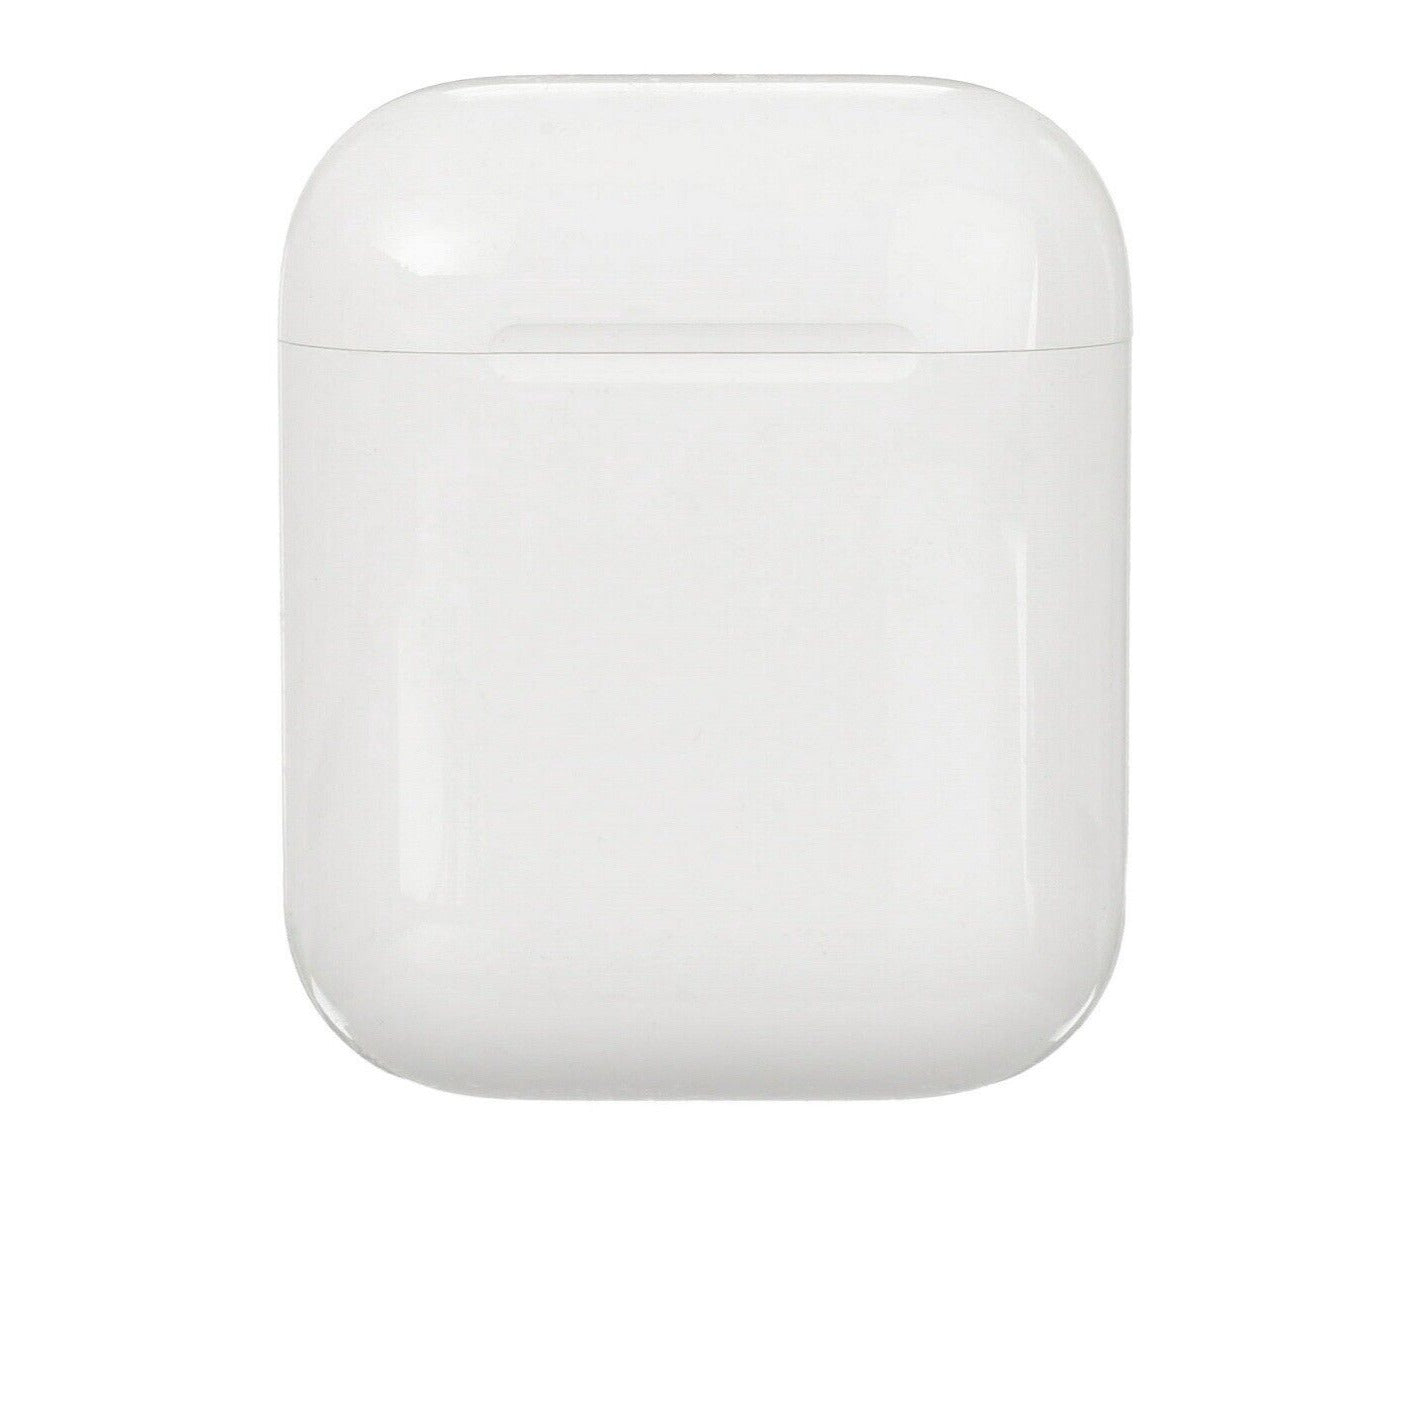 Apple AirPods 2nd Generation Charging Case